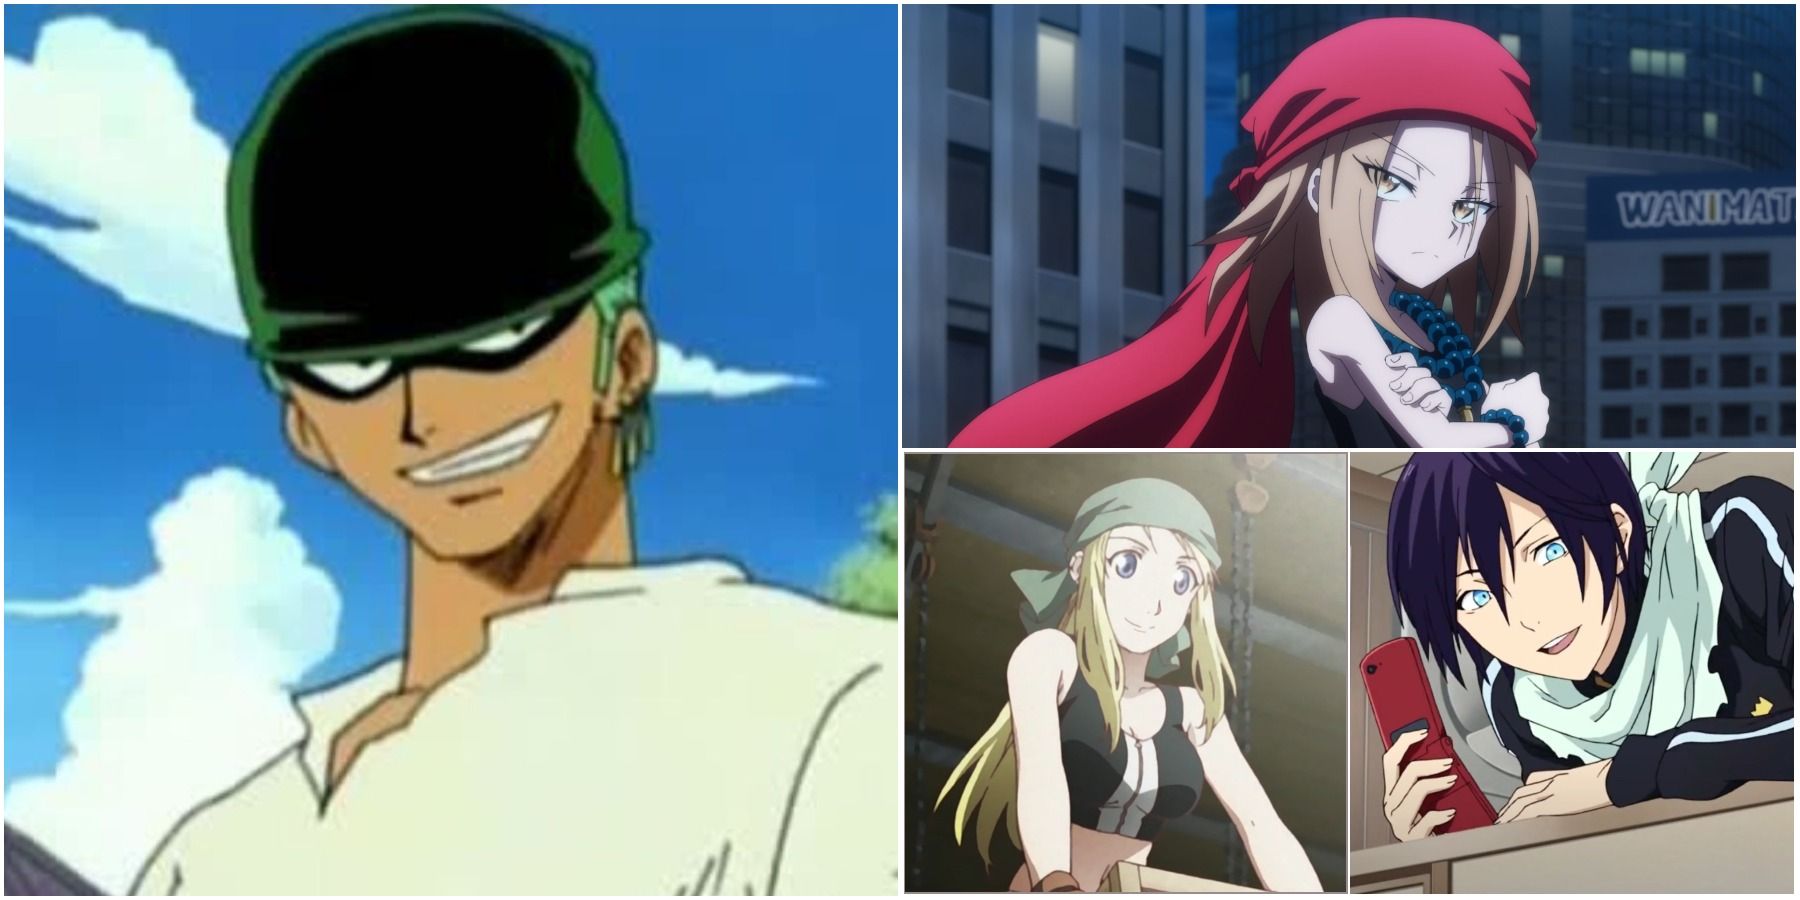 The Most Iconic Bandanas In Anime